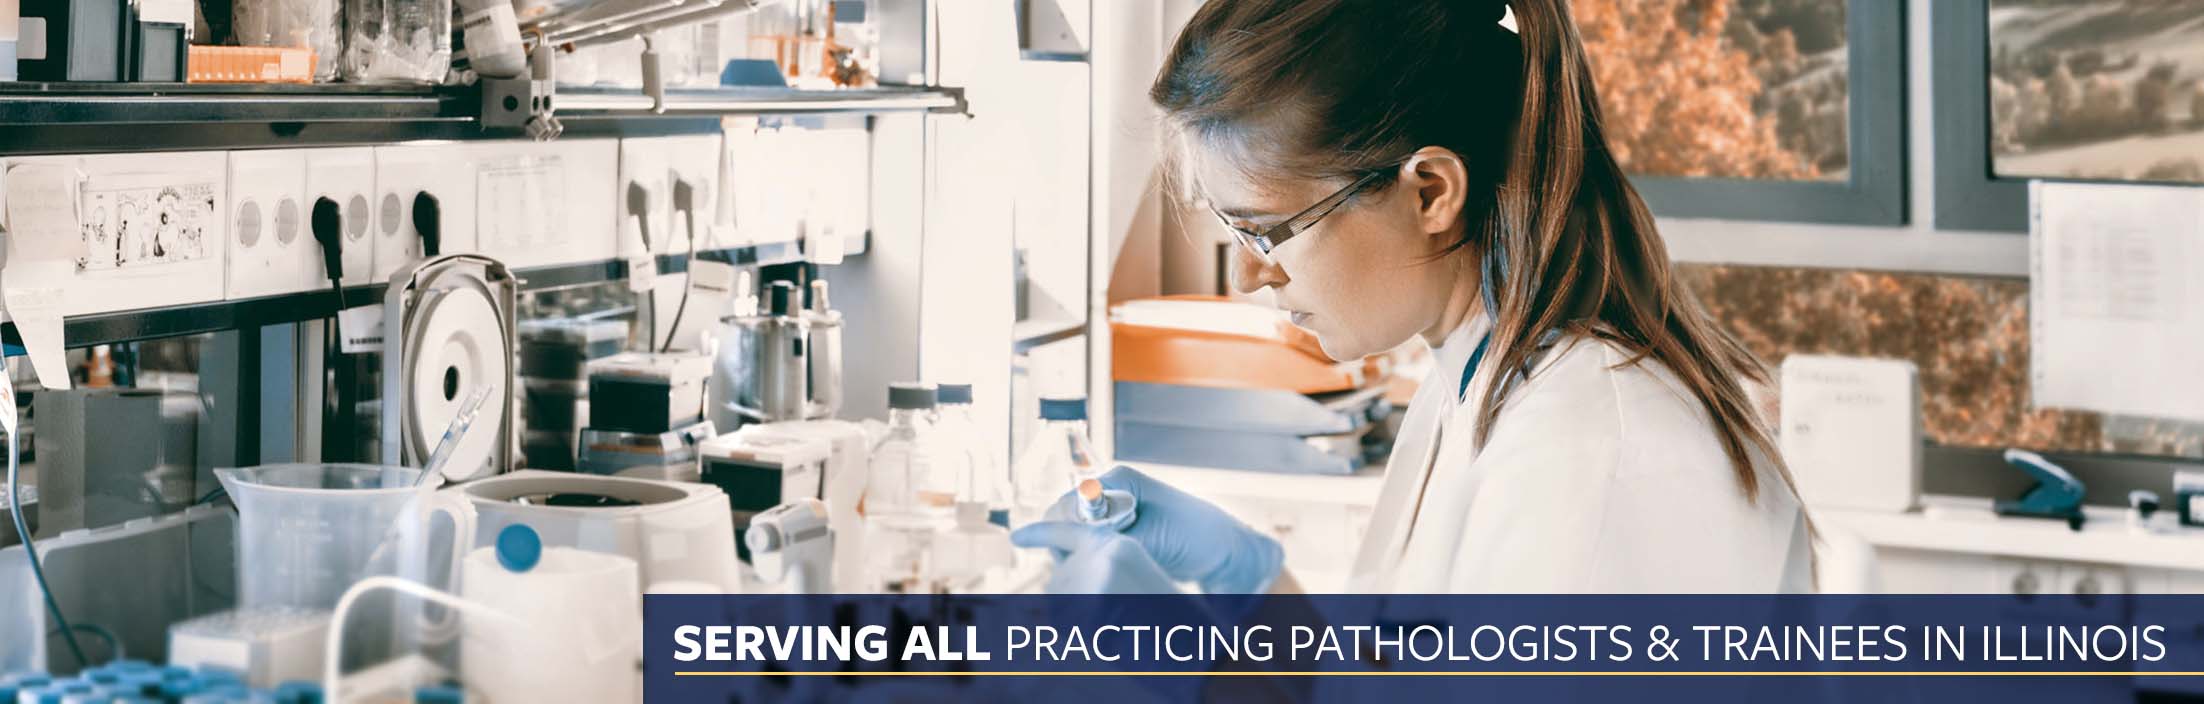 Serving all practicing pathologists & trainees in Illinois